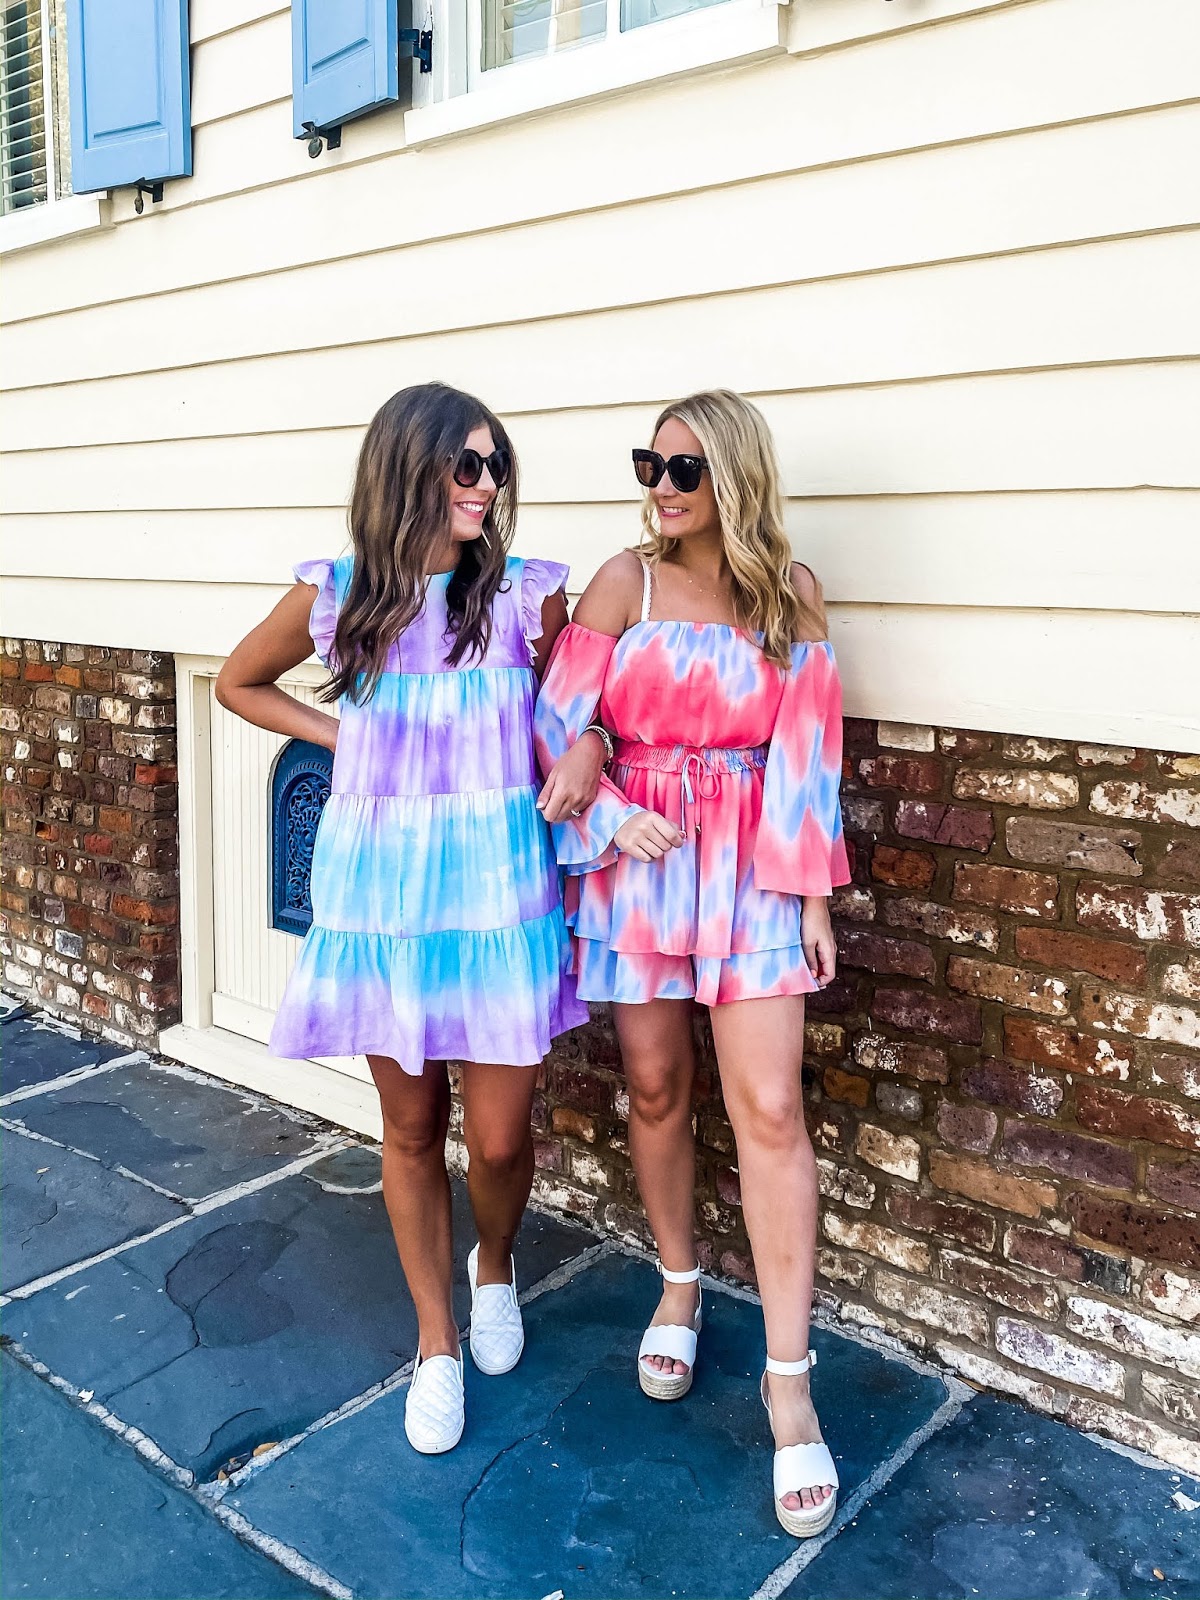 How To Incorporate Tie Dye Into Your Wardrobe - Chasing Cinderella